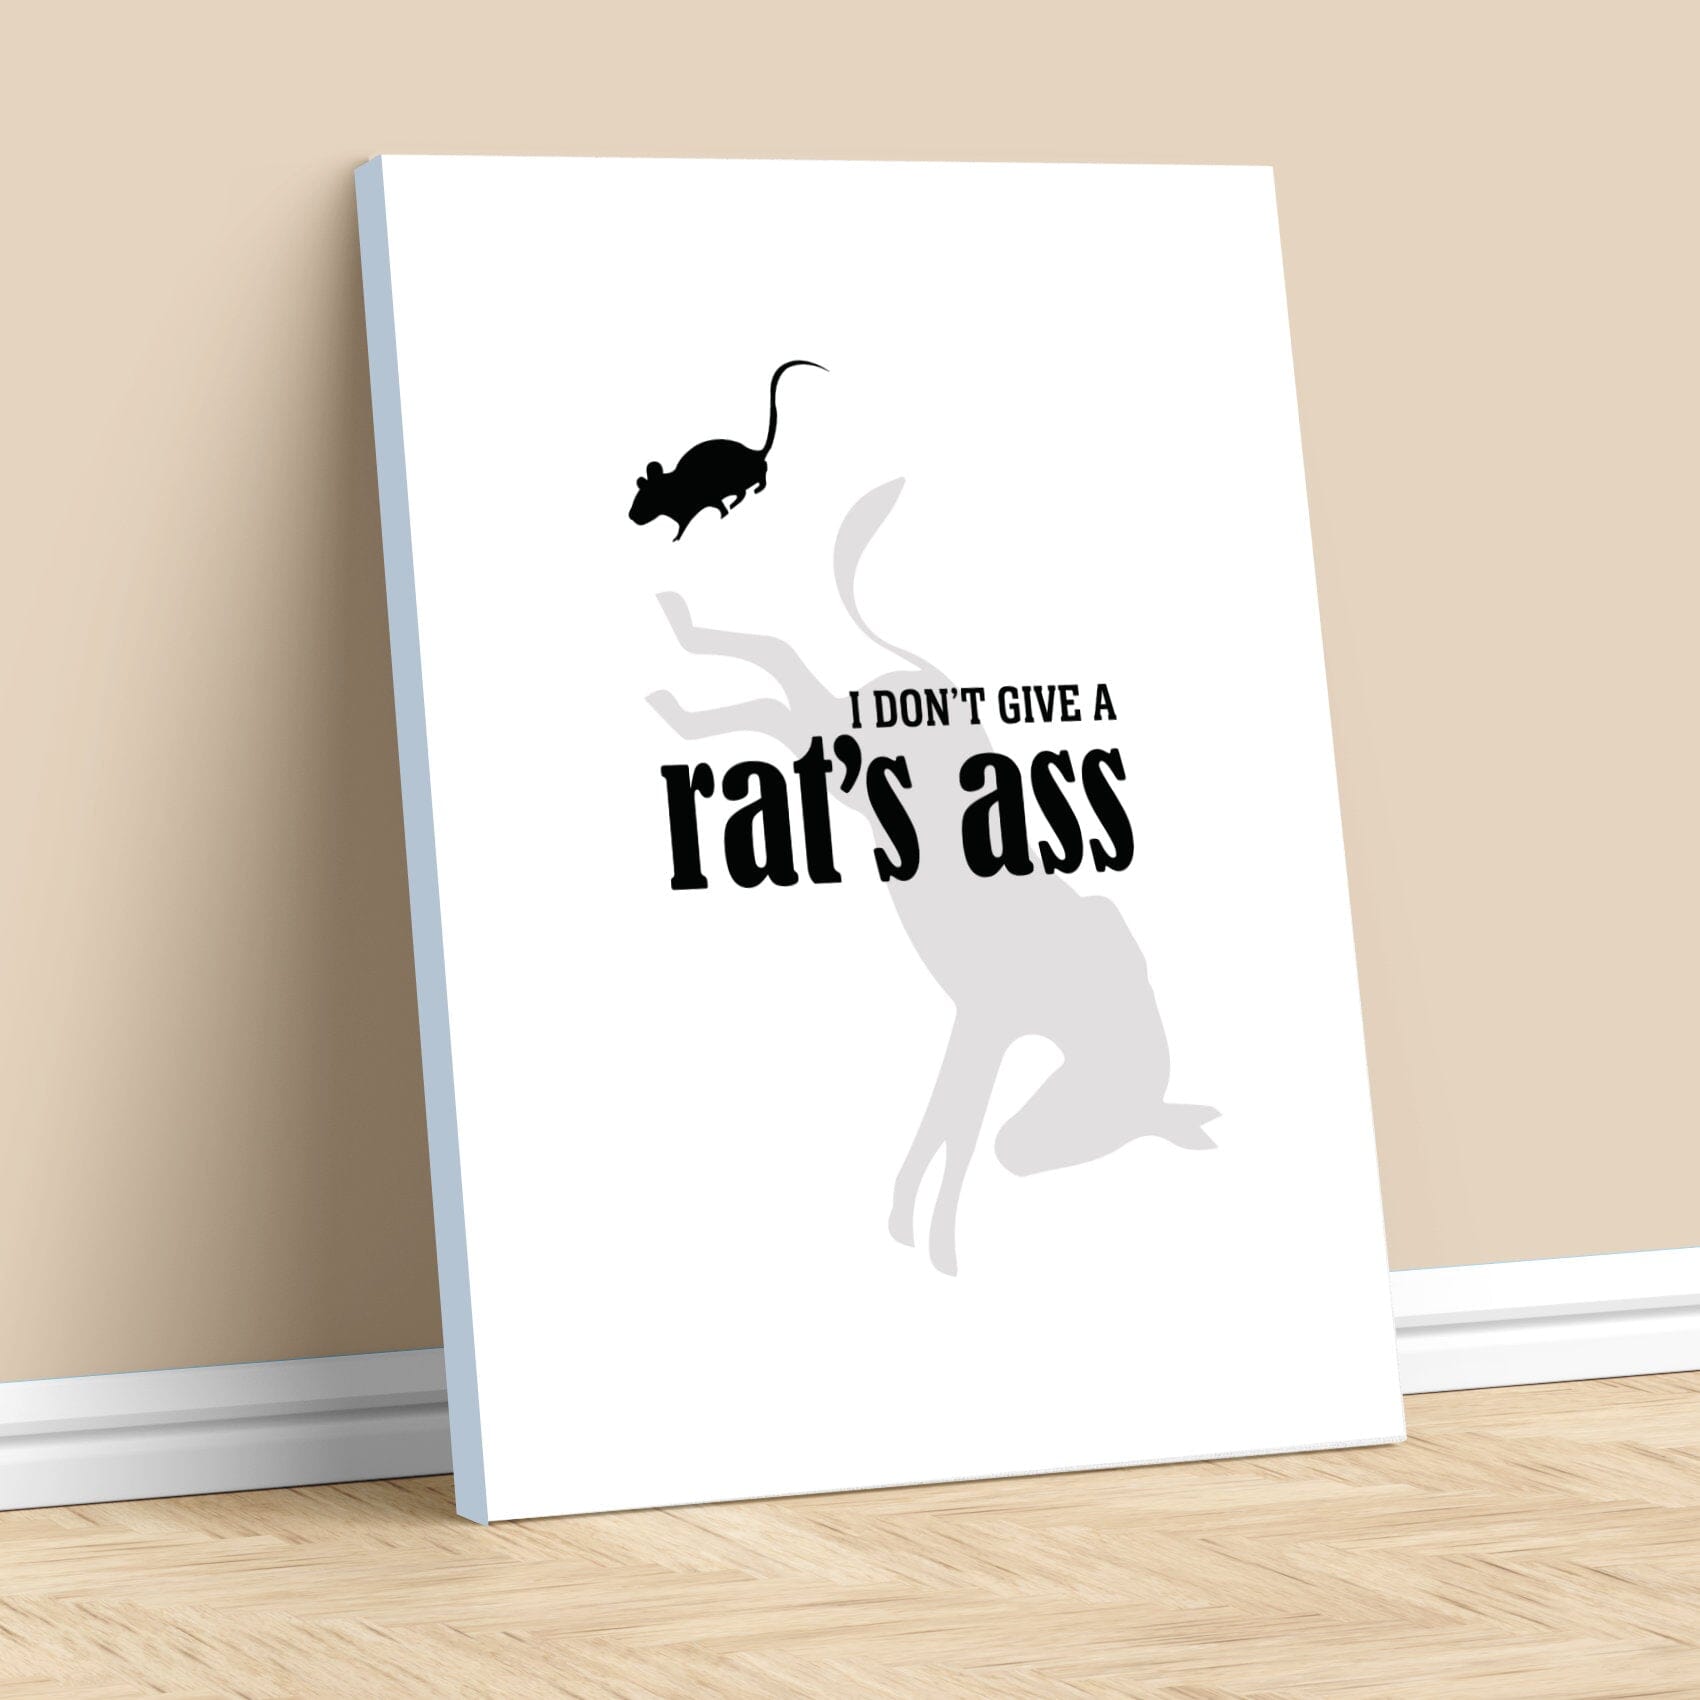 I Don't Give a Rat's Ass - Wise and Witty Sarcastic Print Wise and Wiseass Quotes Song Lyrics Art 11x14 Canvas Wrap 